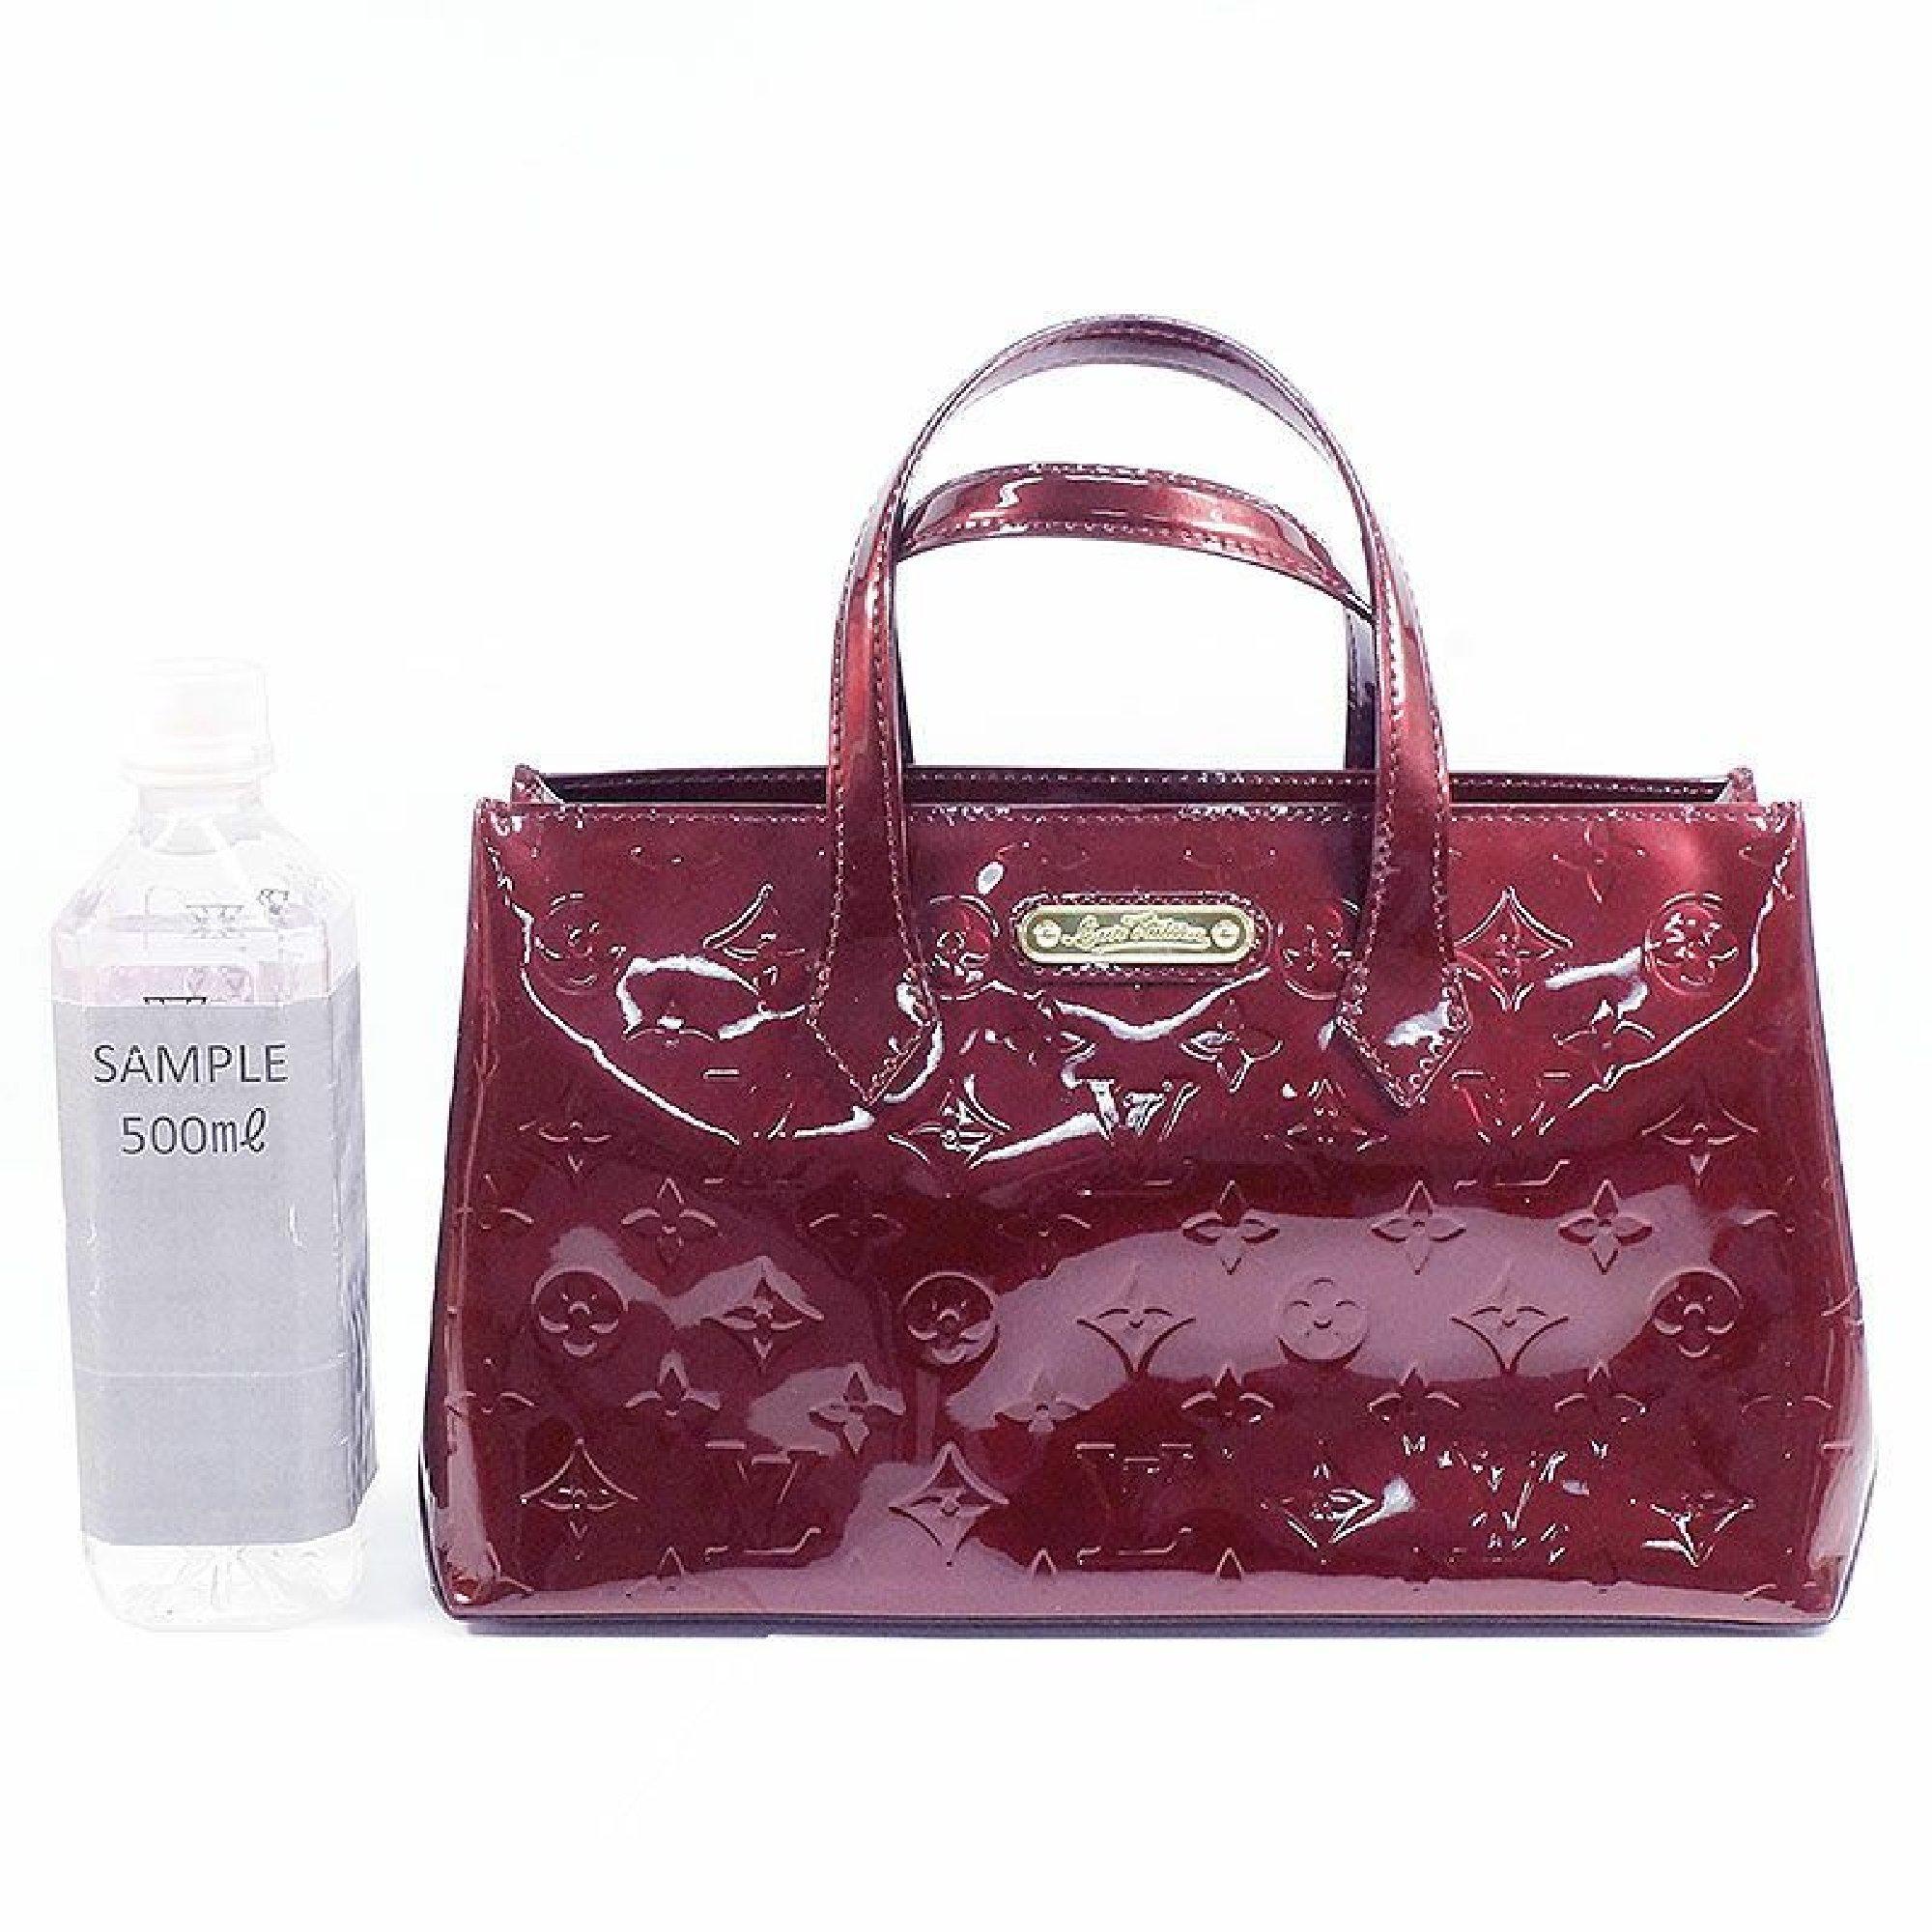 An authentic LOUIS VUITTON Monogram Verni Wilshire PM Womens handbag M93641 Amaranto. The color is Amaranto. The outside material is Patent Leather. The pattern is WilshirePM. This item is Contemporary. The year of manufacture would be 2010.
Rank
AB